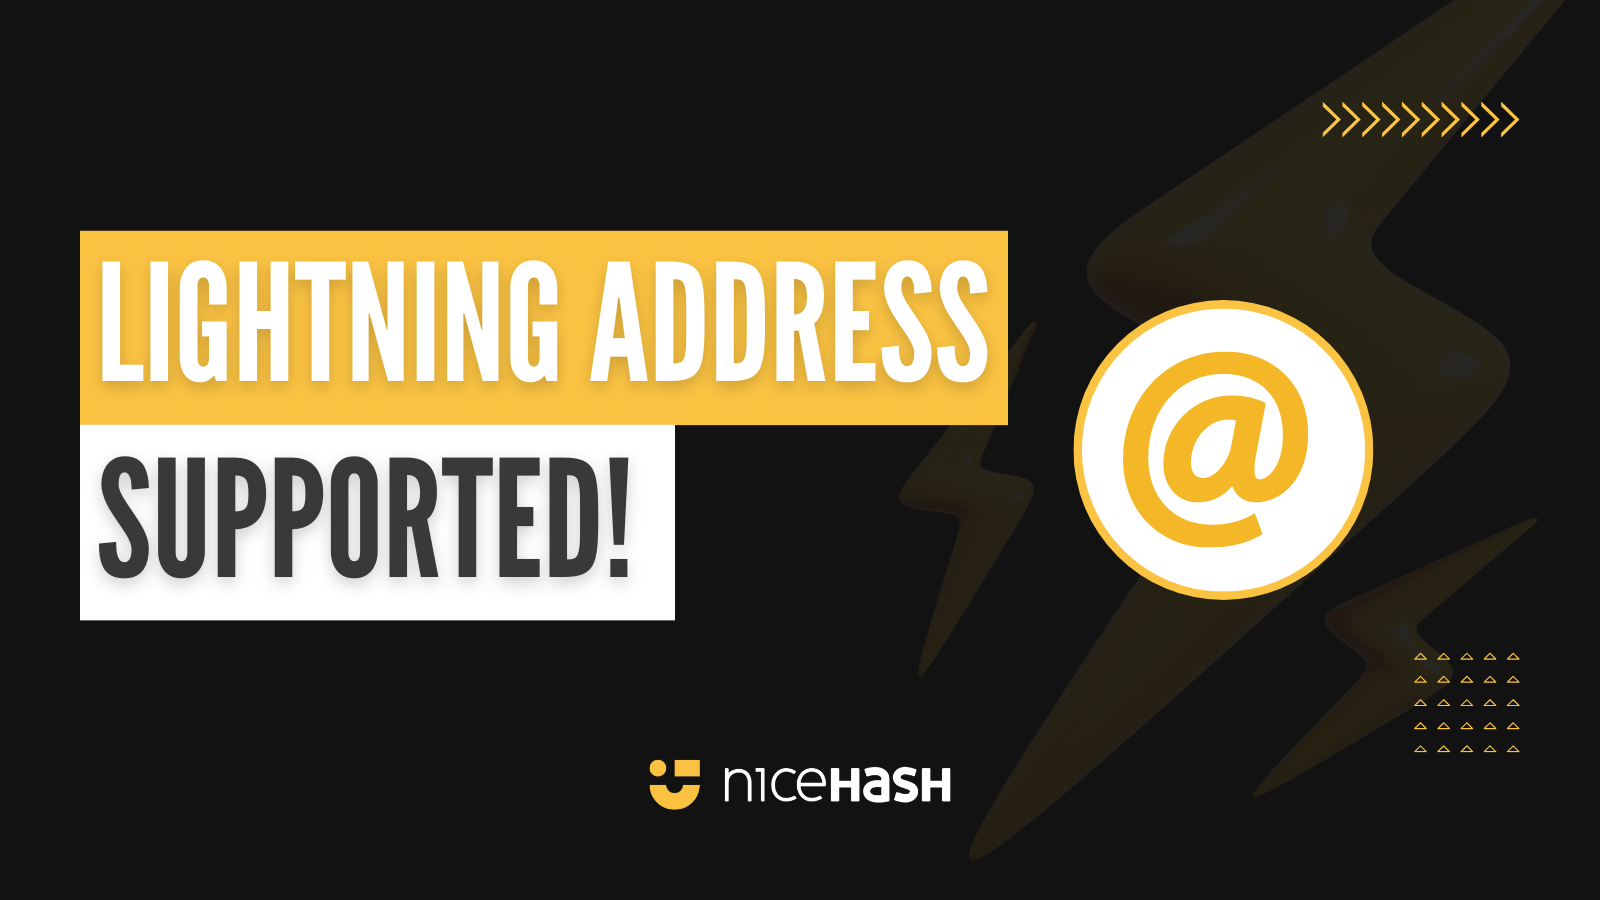 How To Transfer Crypto (BTC, ETH, XRP etc) From Nicehash to Binance? - CaptainAltcoin